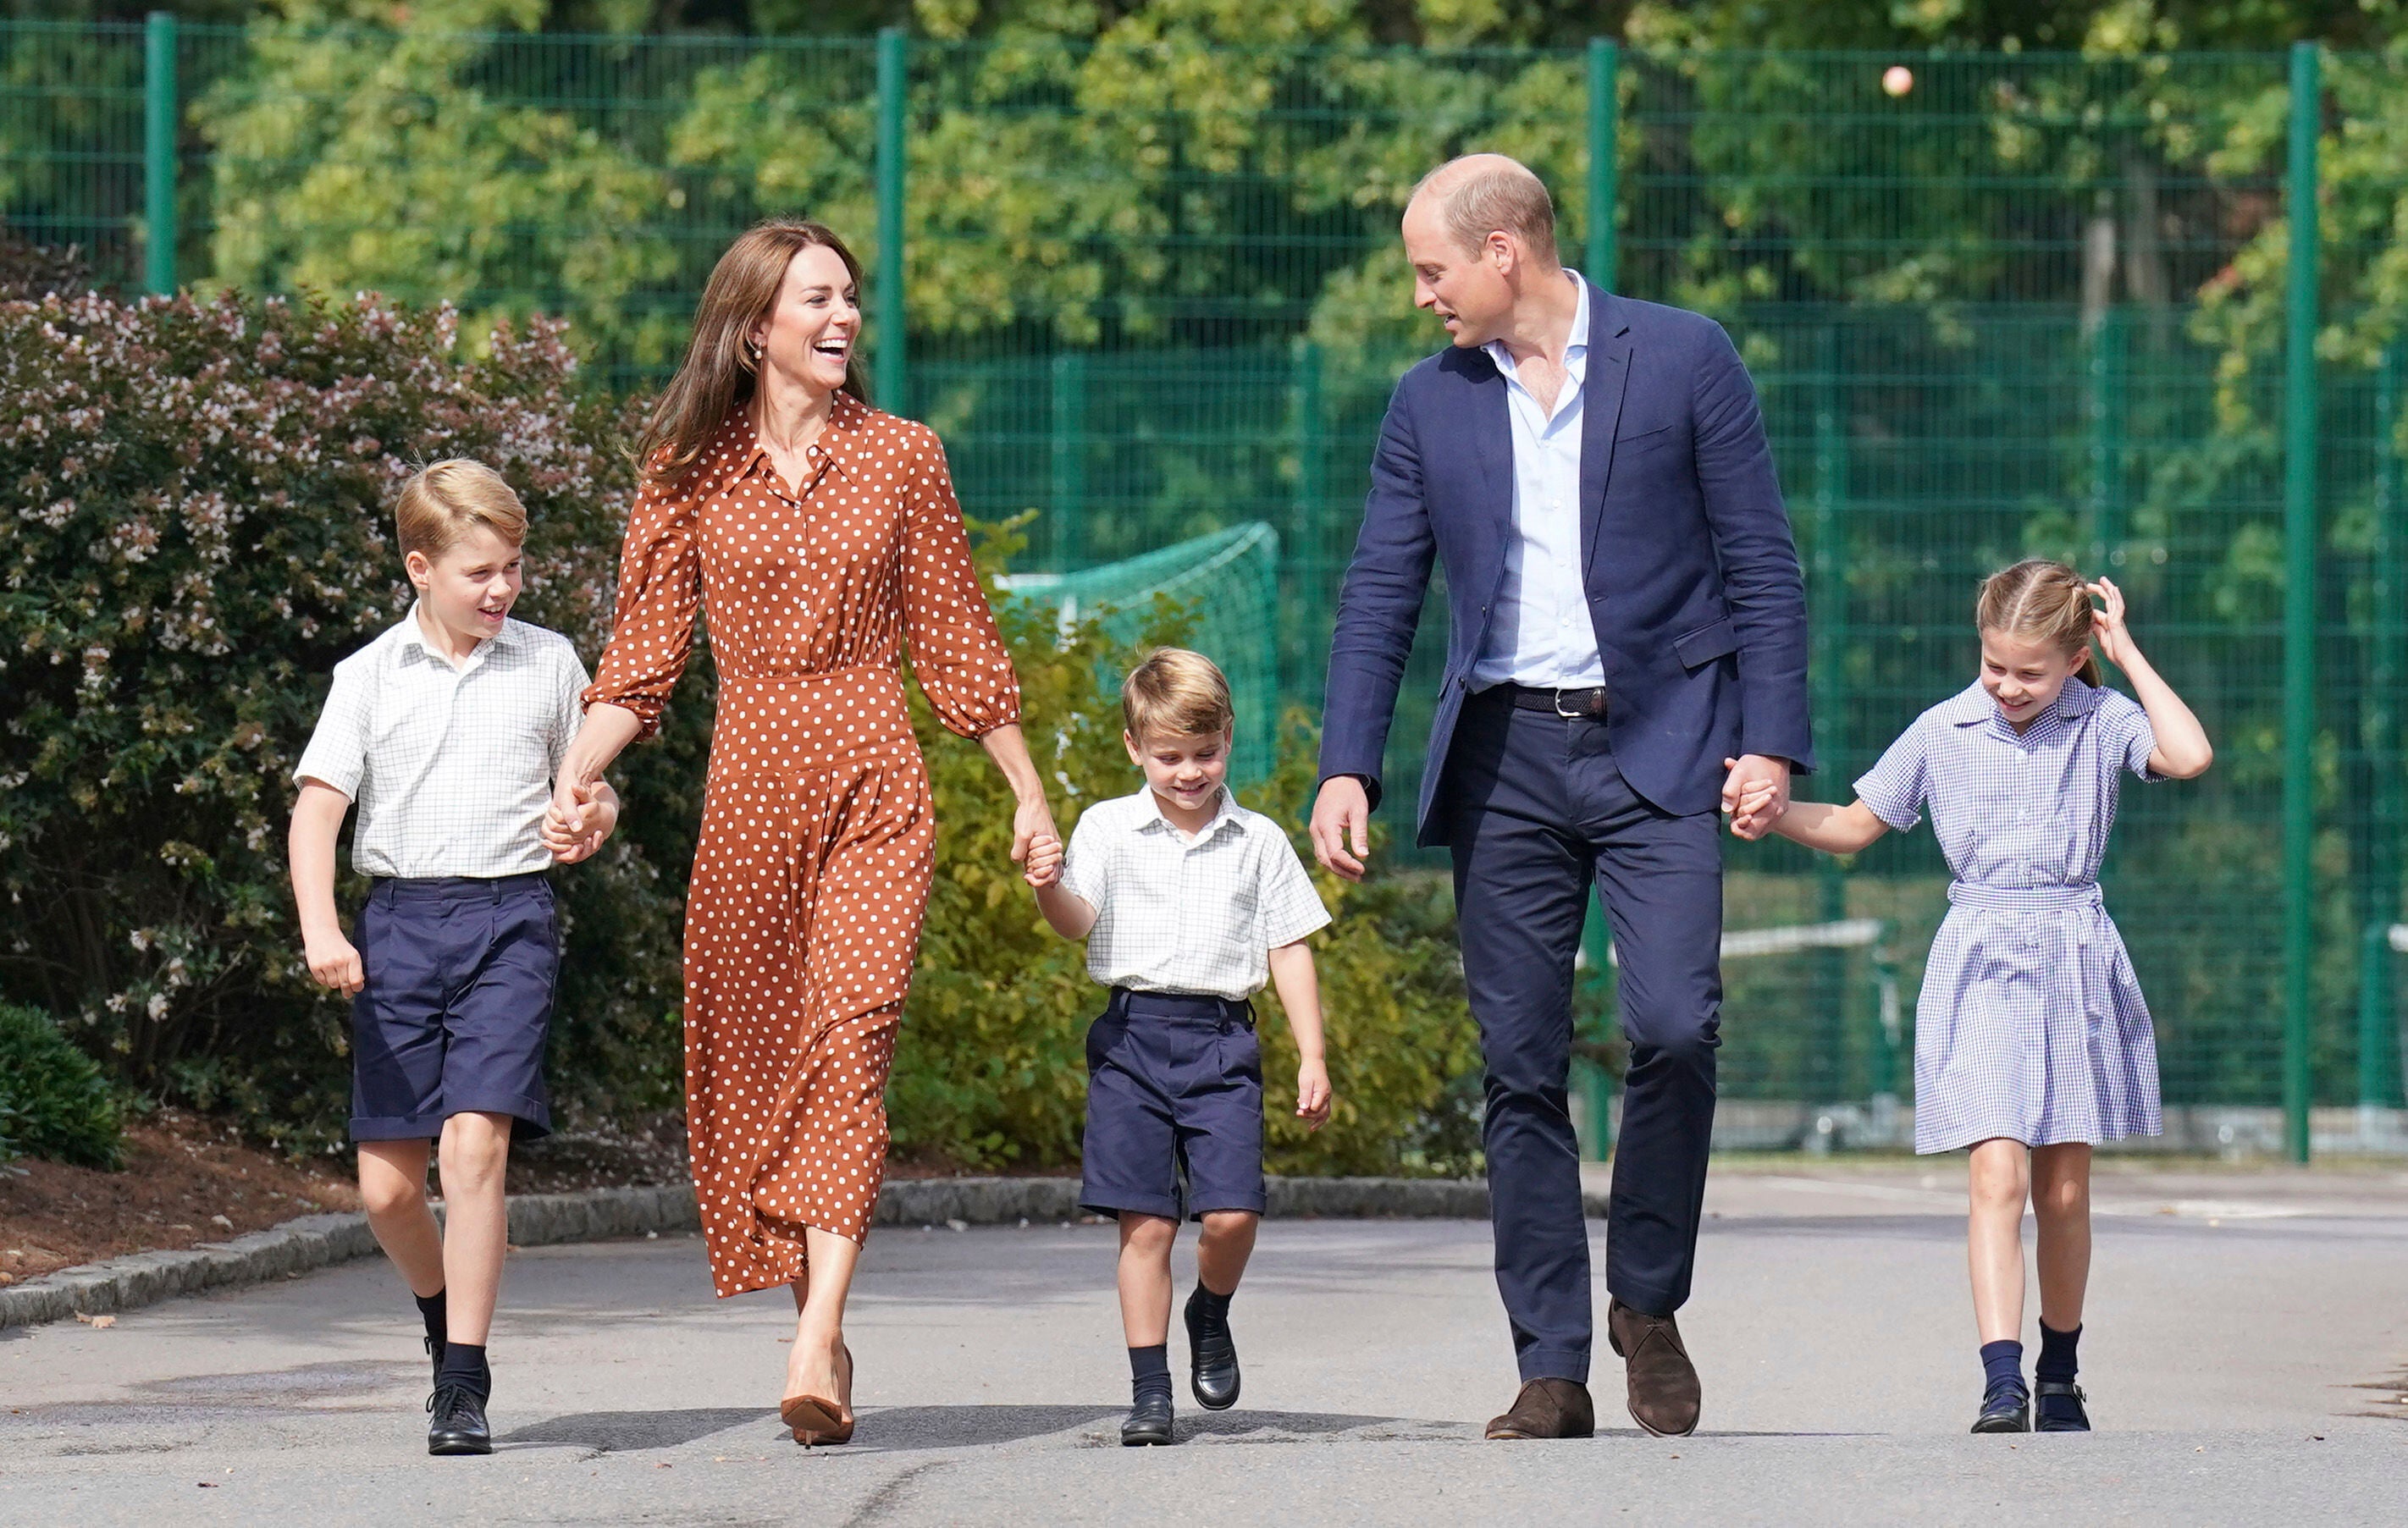 The Prince and Princess of Wales with their children Princes George and Louis and Princess Charlotte